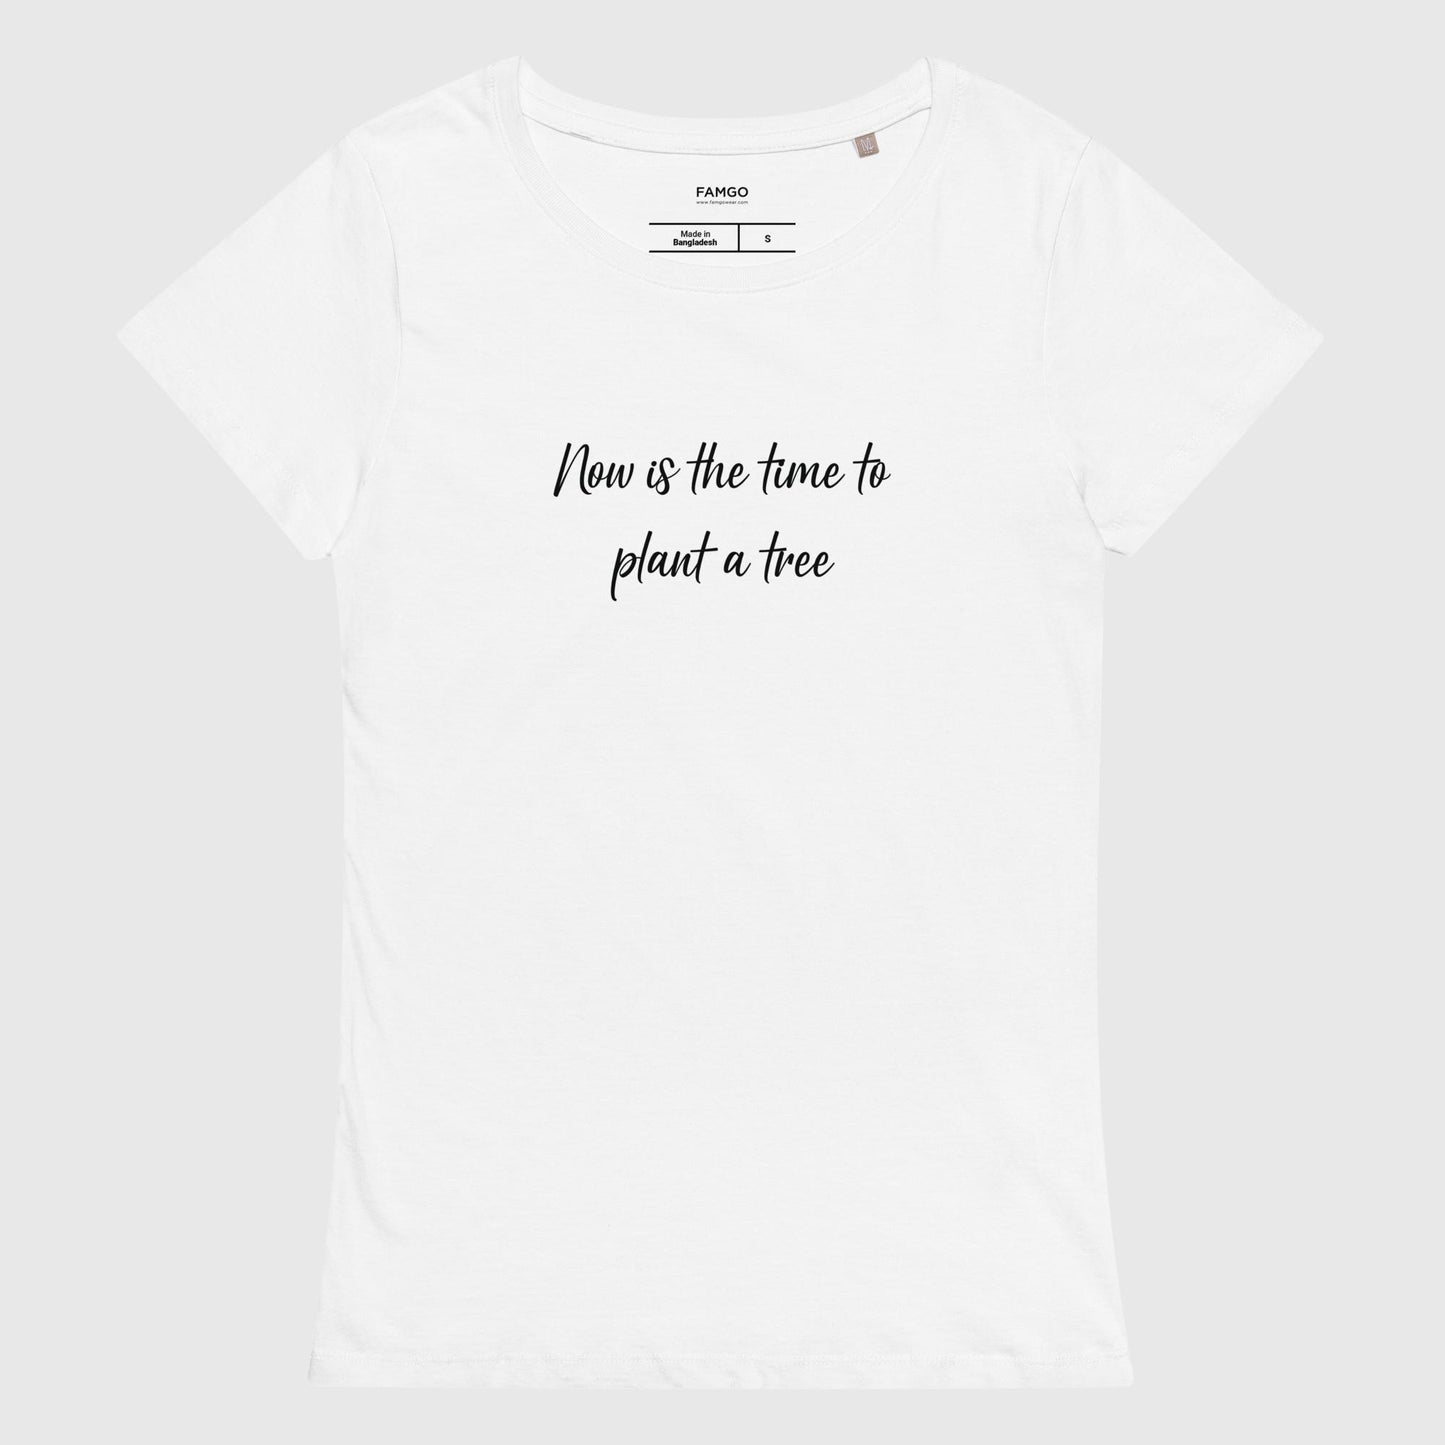 Women's white organic cotton t-shirt that features, "Now is the time to plant a tree,' inspired by the Chinese proverb, "The best time to plant a tree was 20 years ago. The second best time is now."